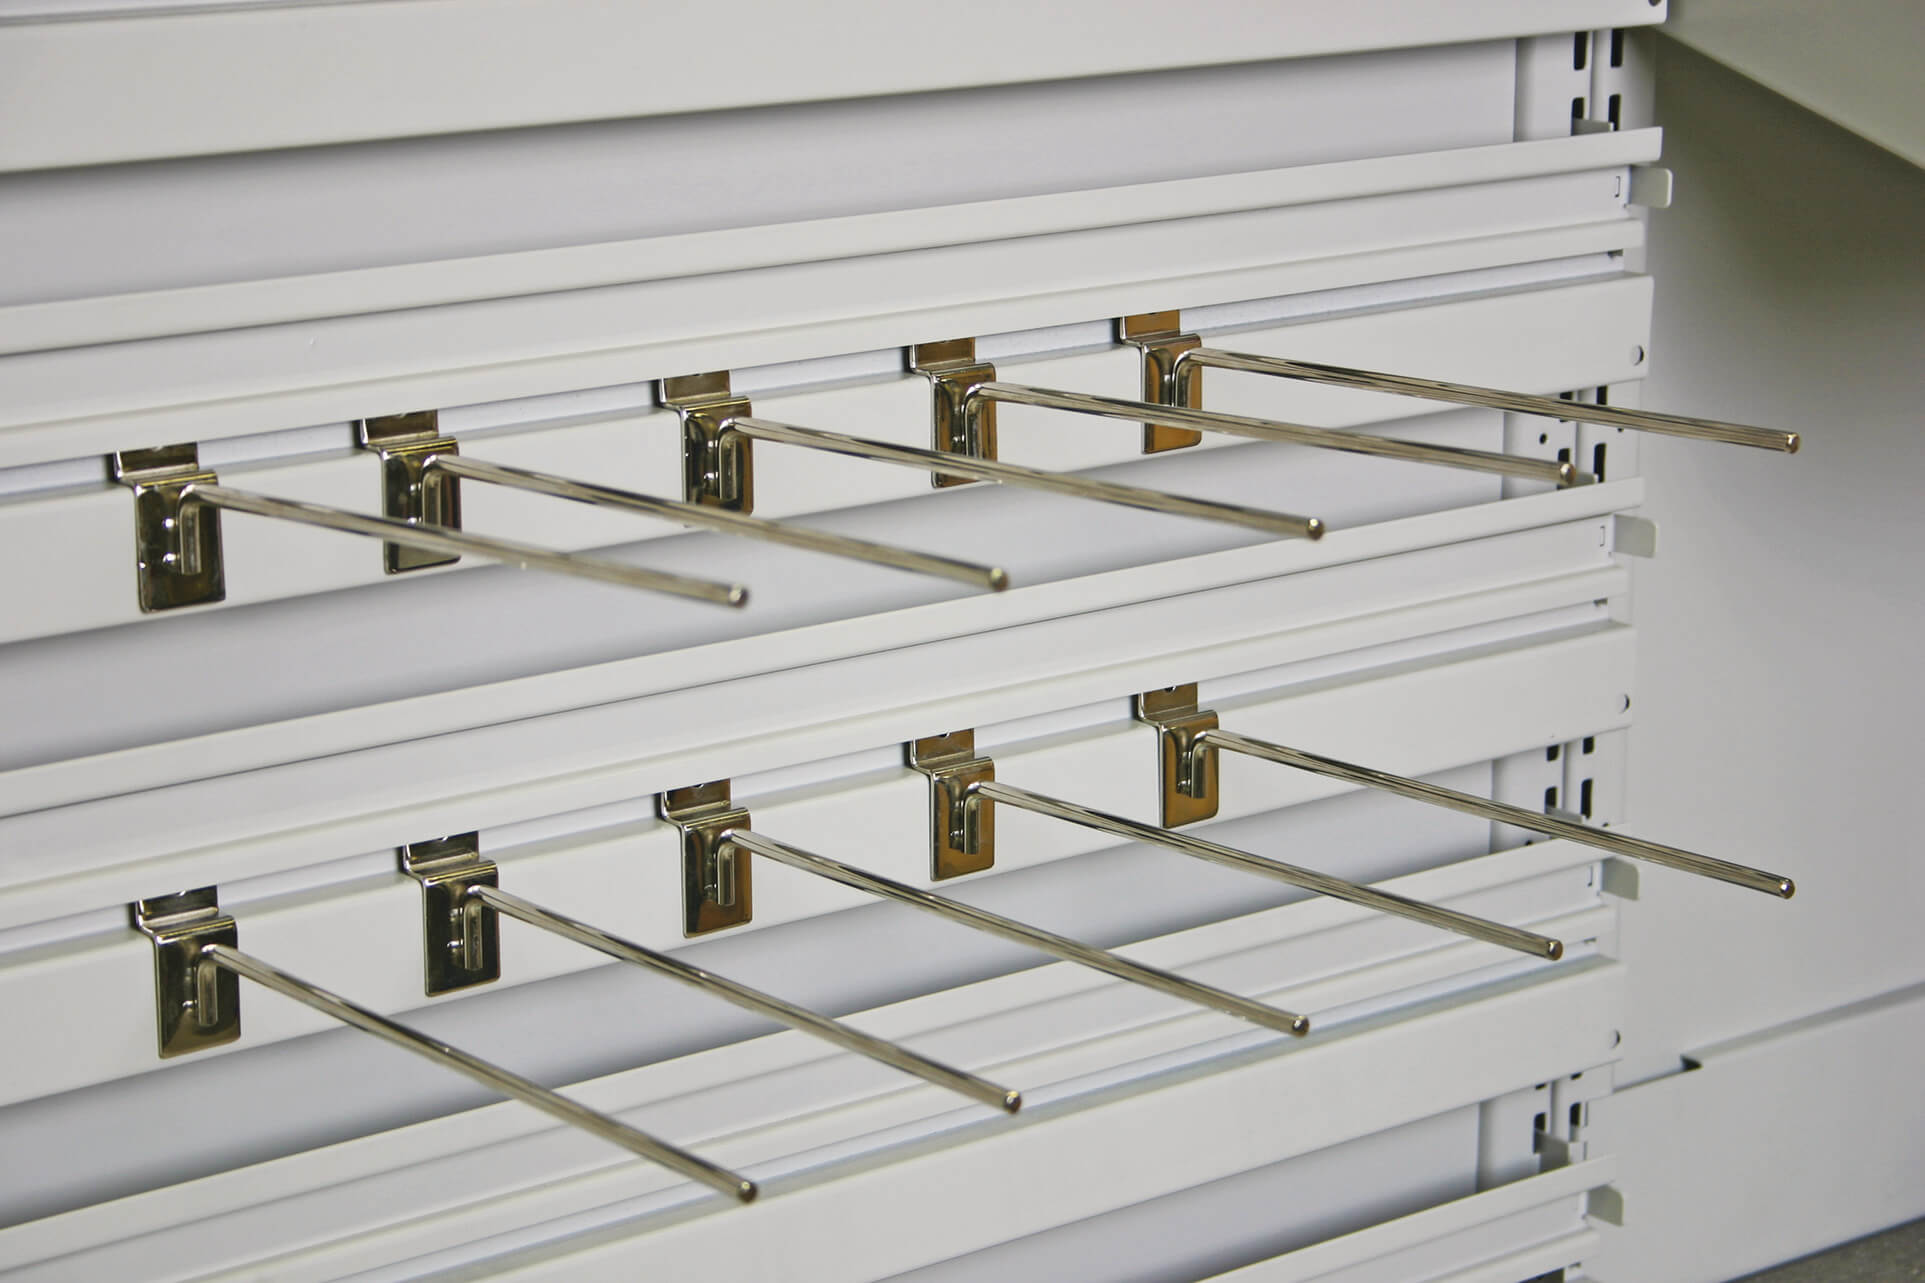 Slat-wall accessories for modular shelving and modular carts letting you hang a wide variety of items